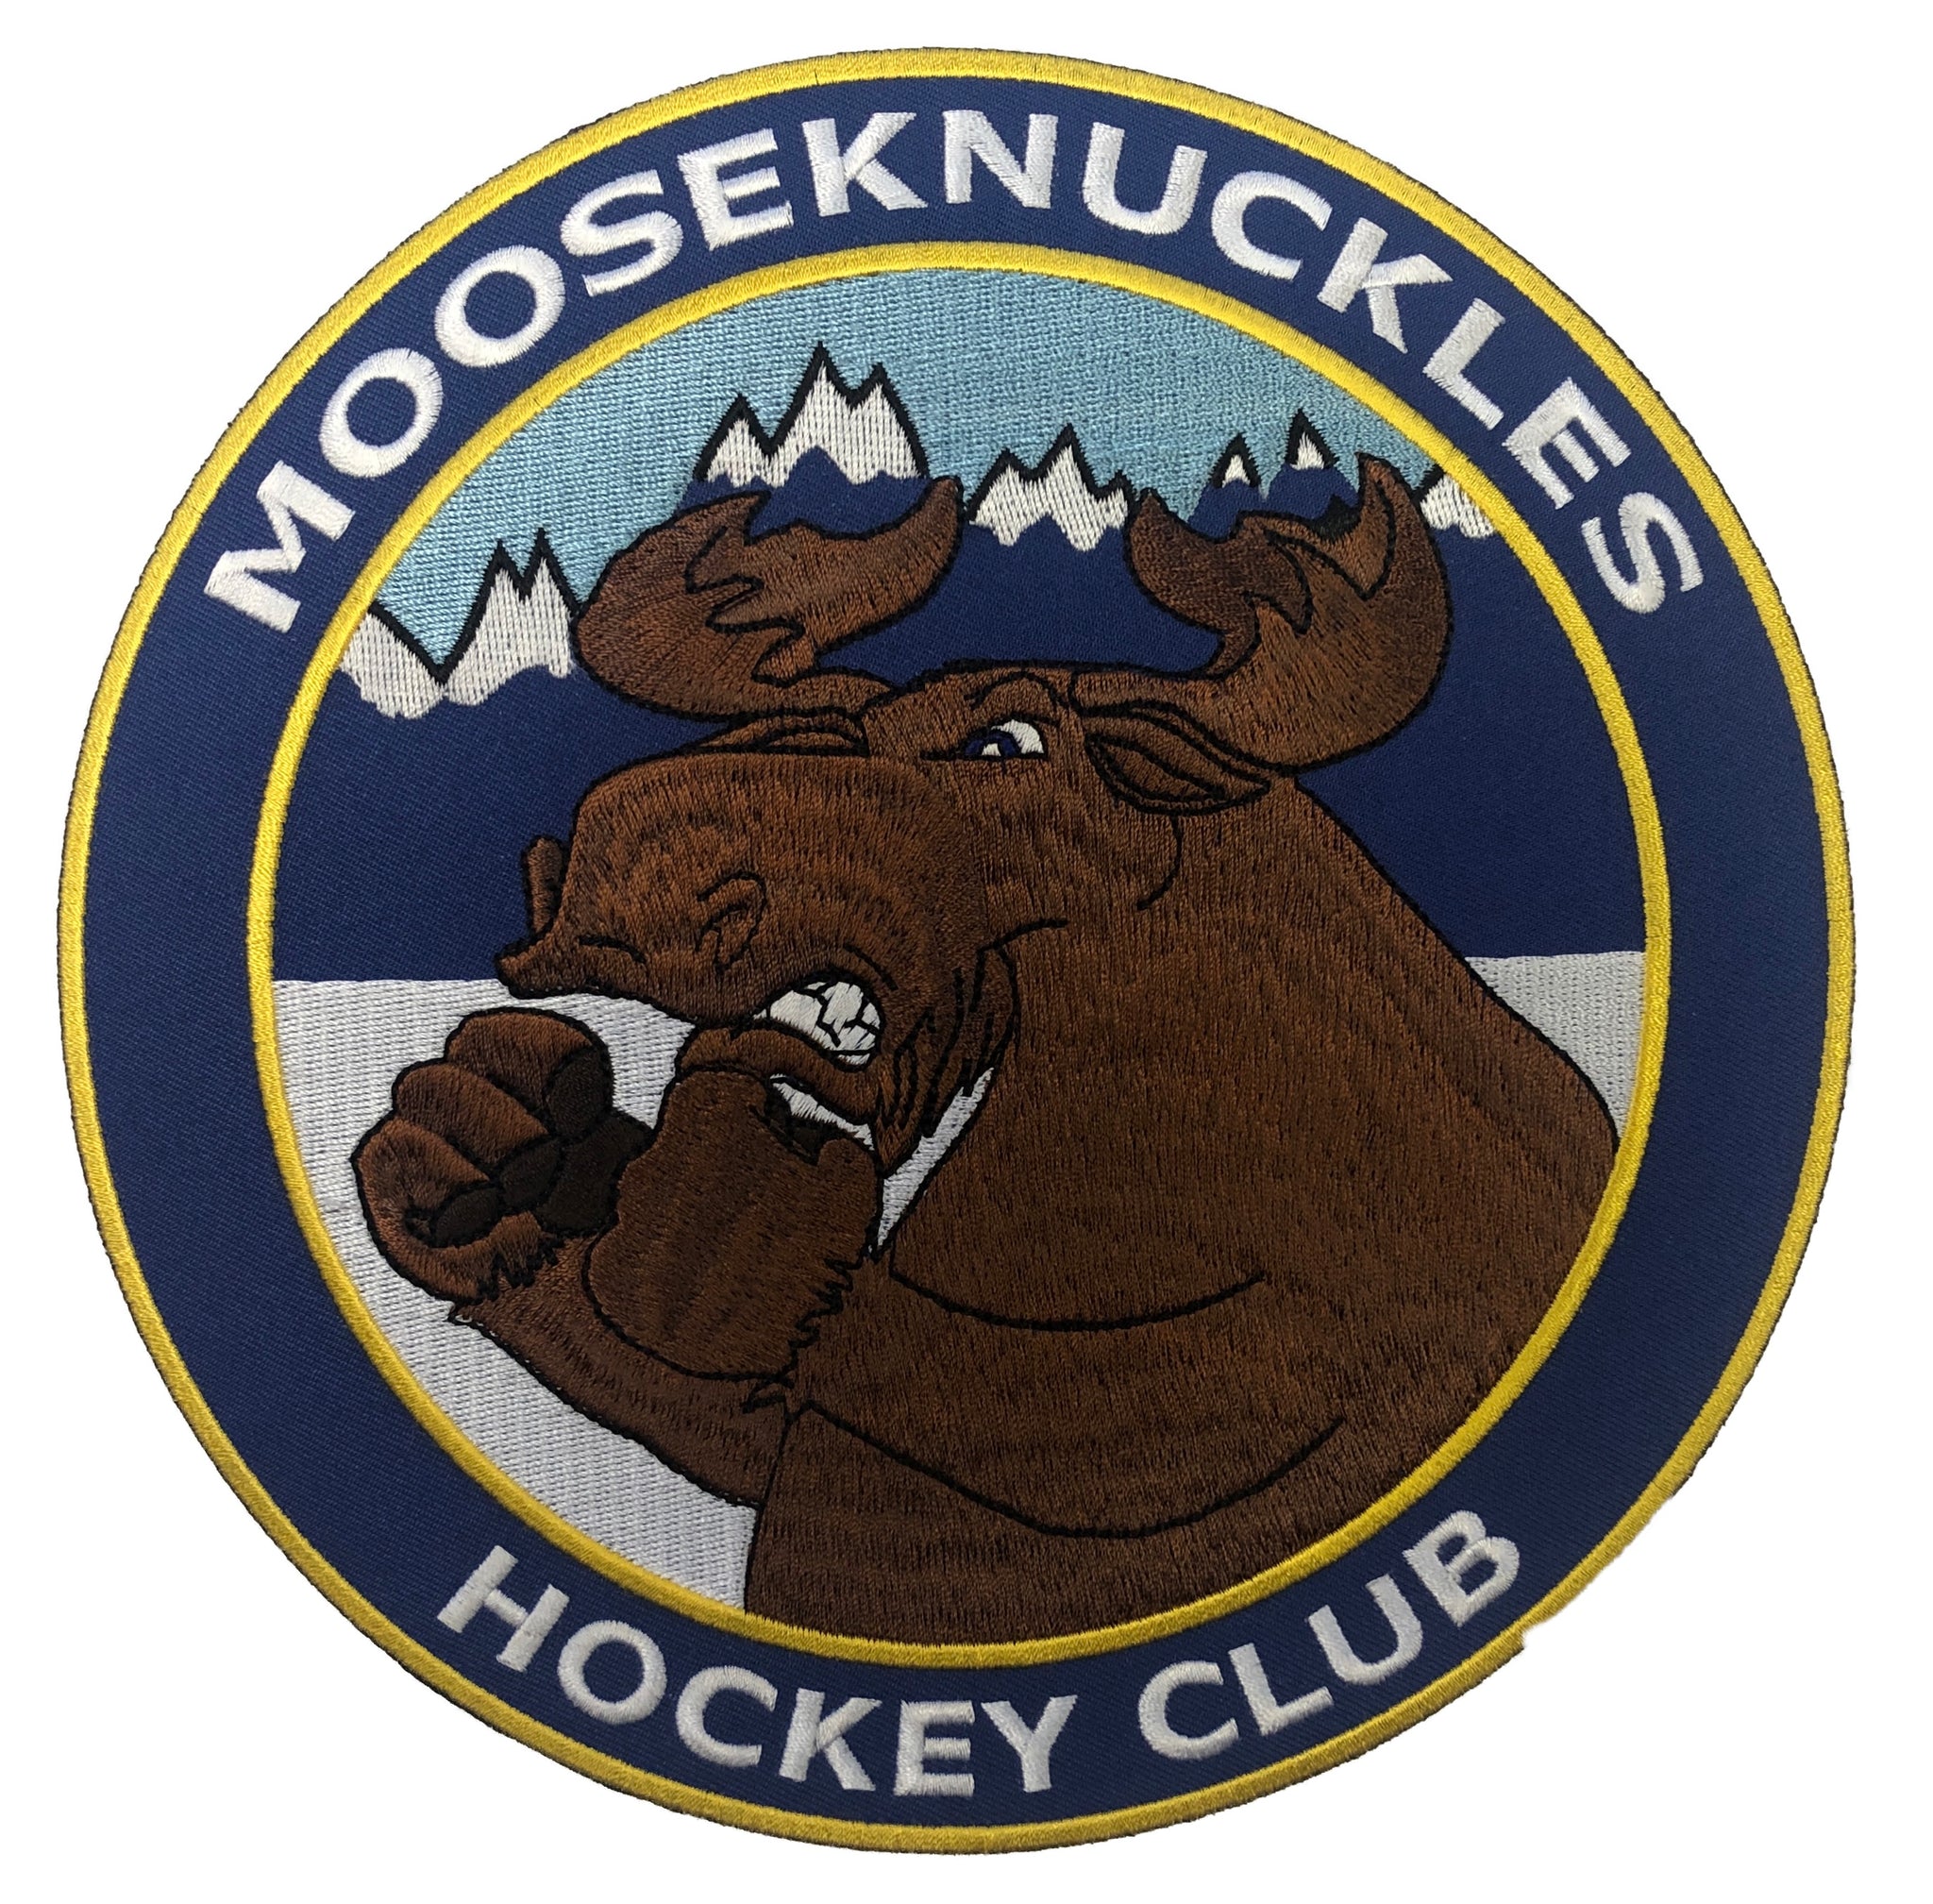 Custom Hockey Jerseys with The Mooseknuckles Hockey Club Logo Youth Large / (name and Number on Back and Sleeves) / White